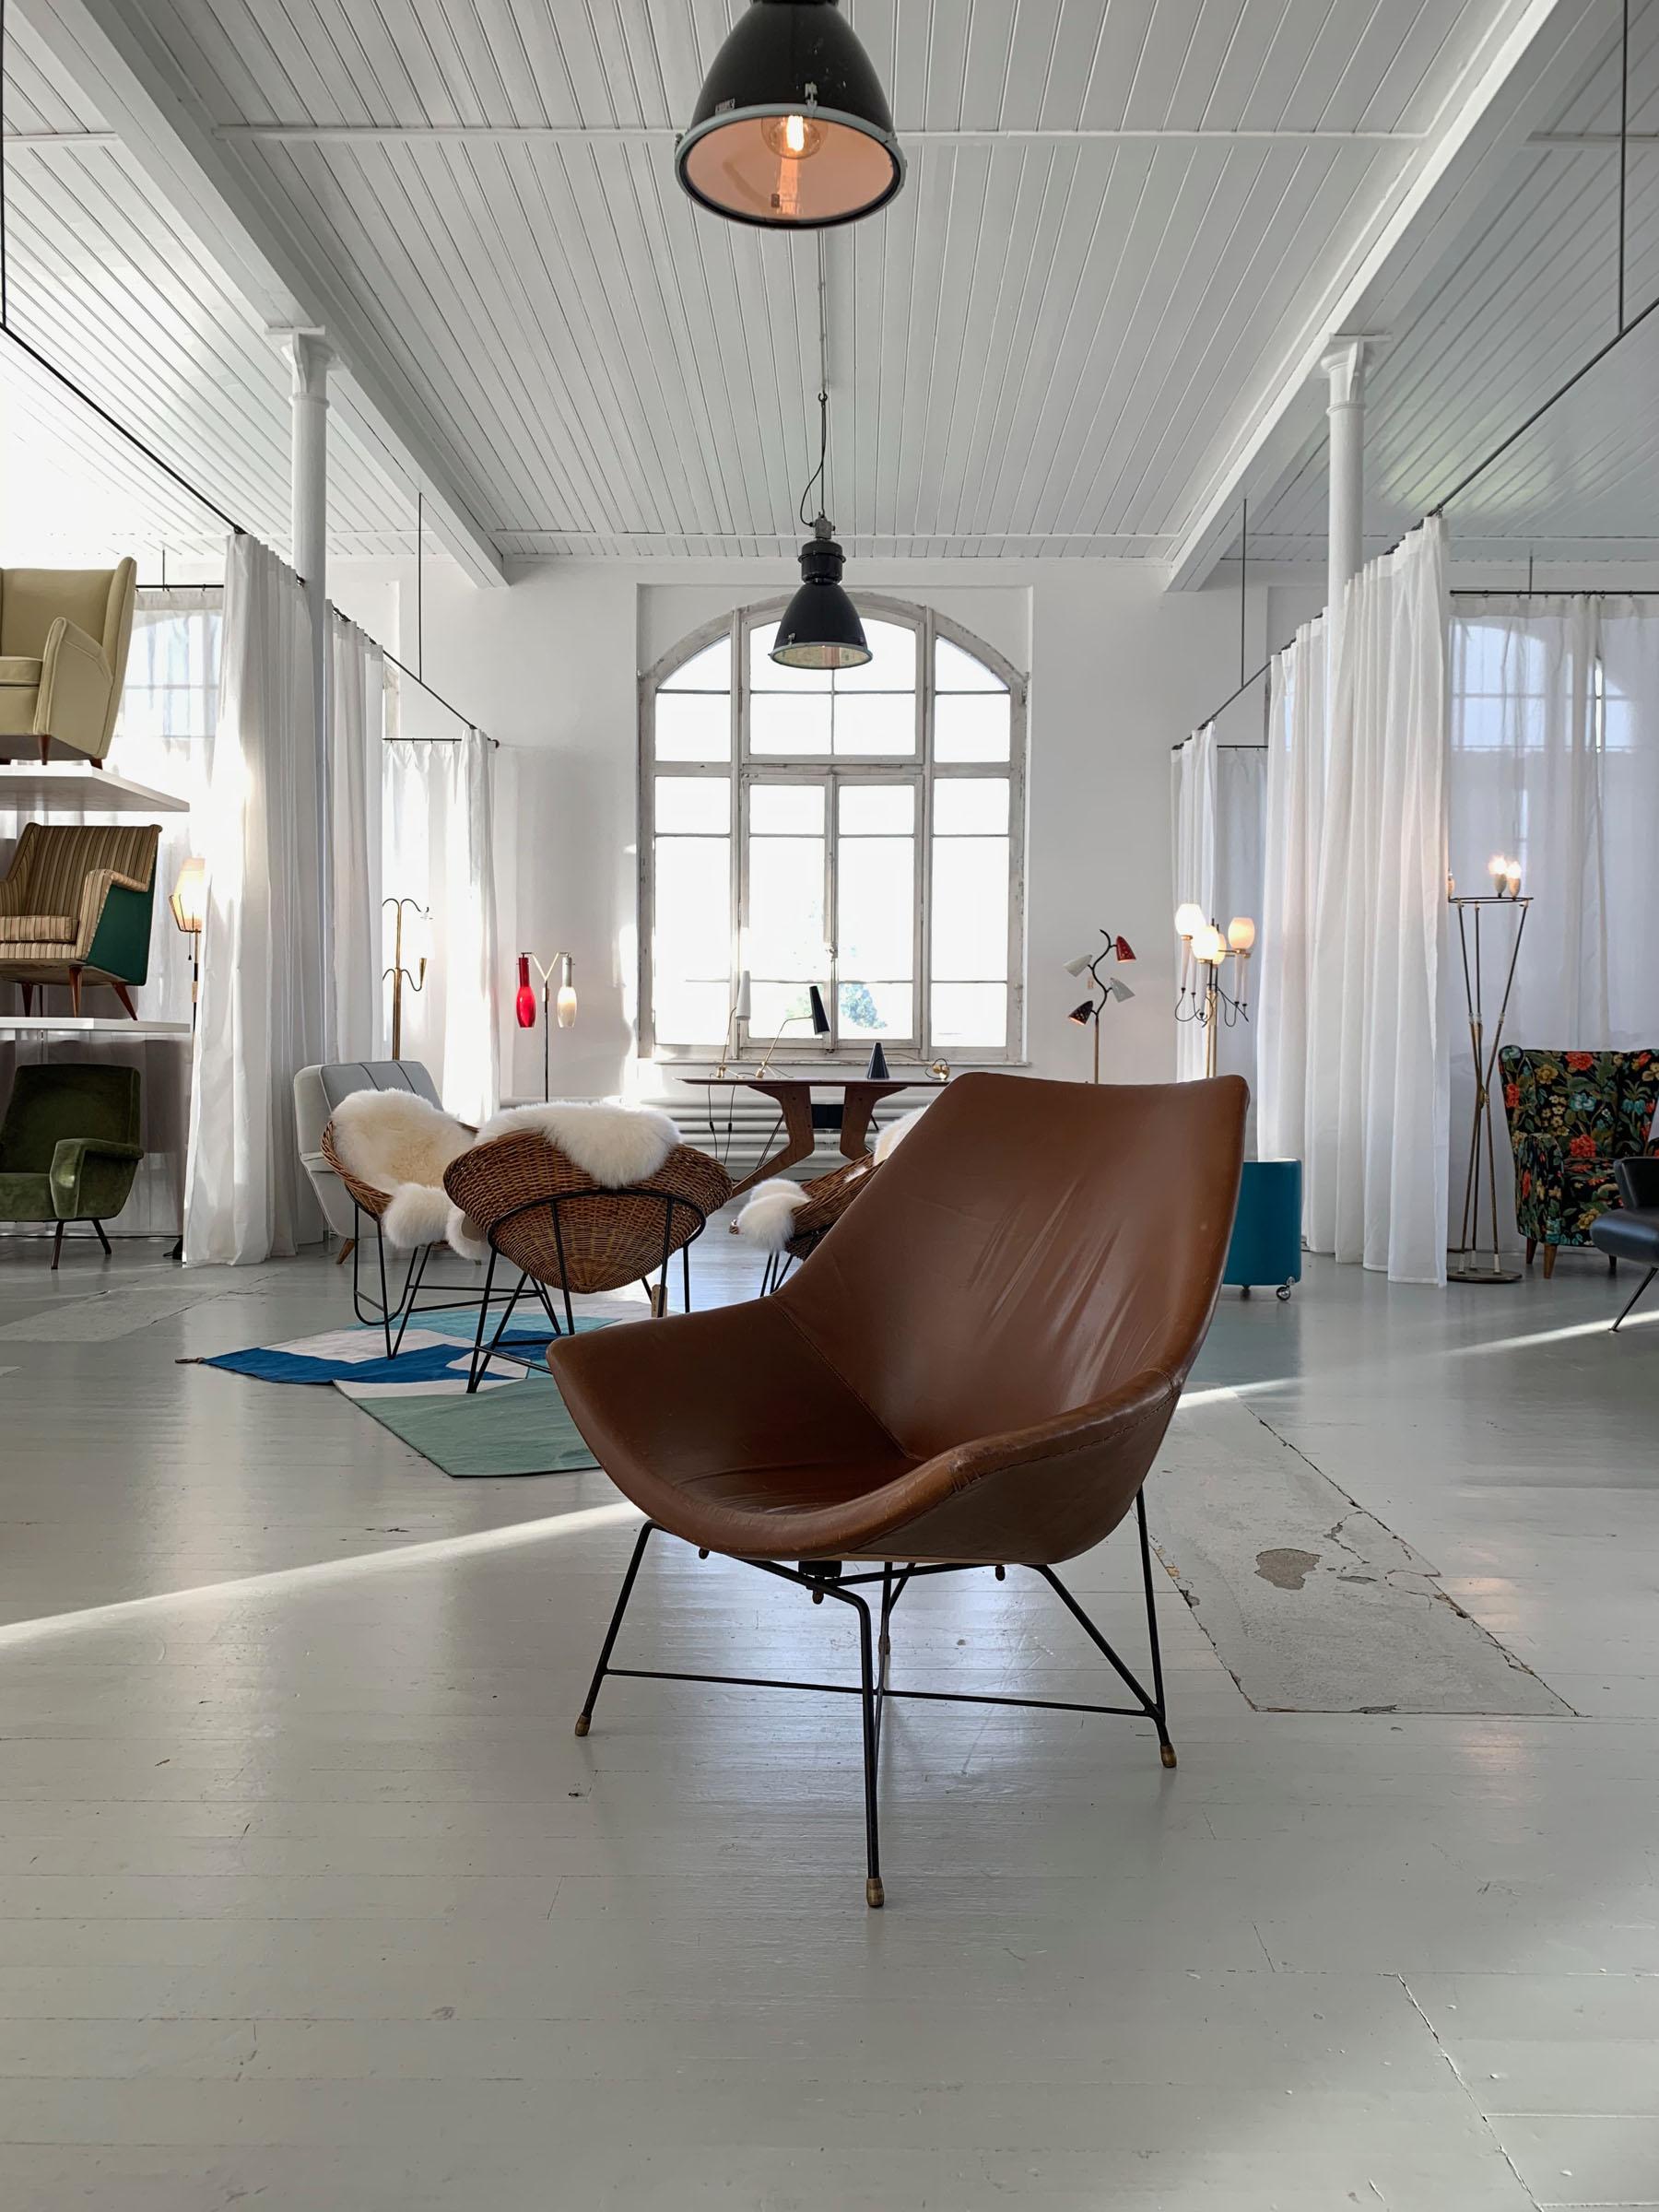 Mid-20th Century Italian Brown Leather Kosmos Chair Design by Augusto Bozzi for Saporiti, 1954 For Sale